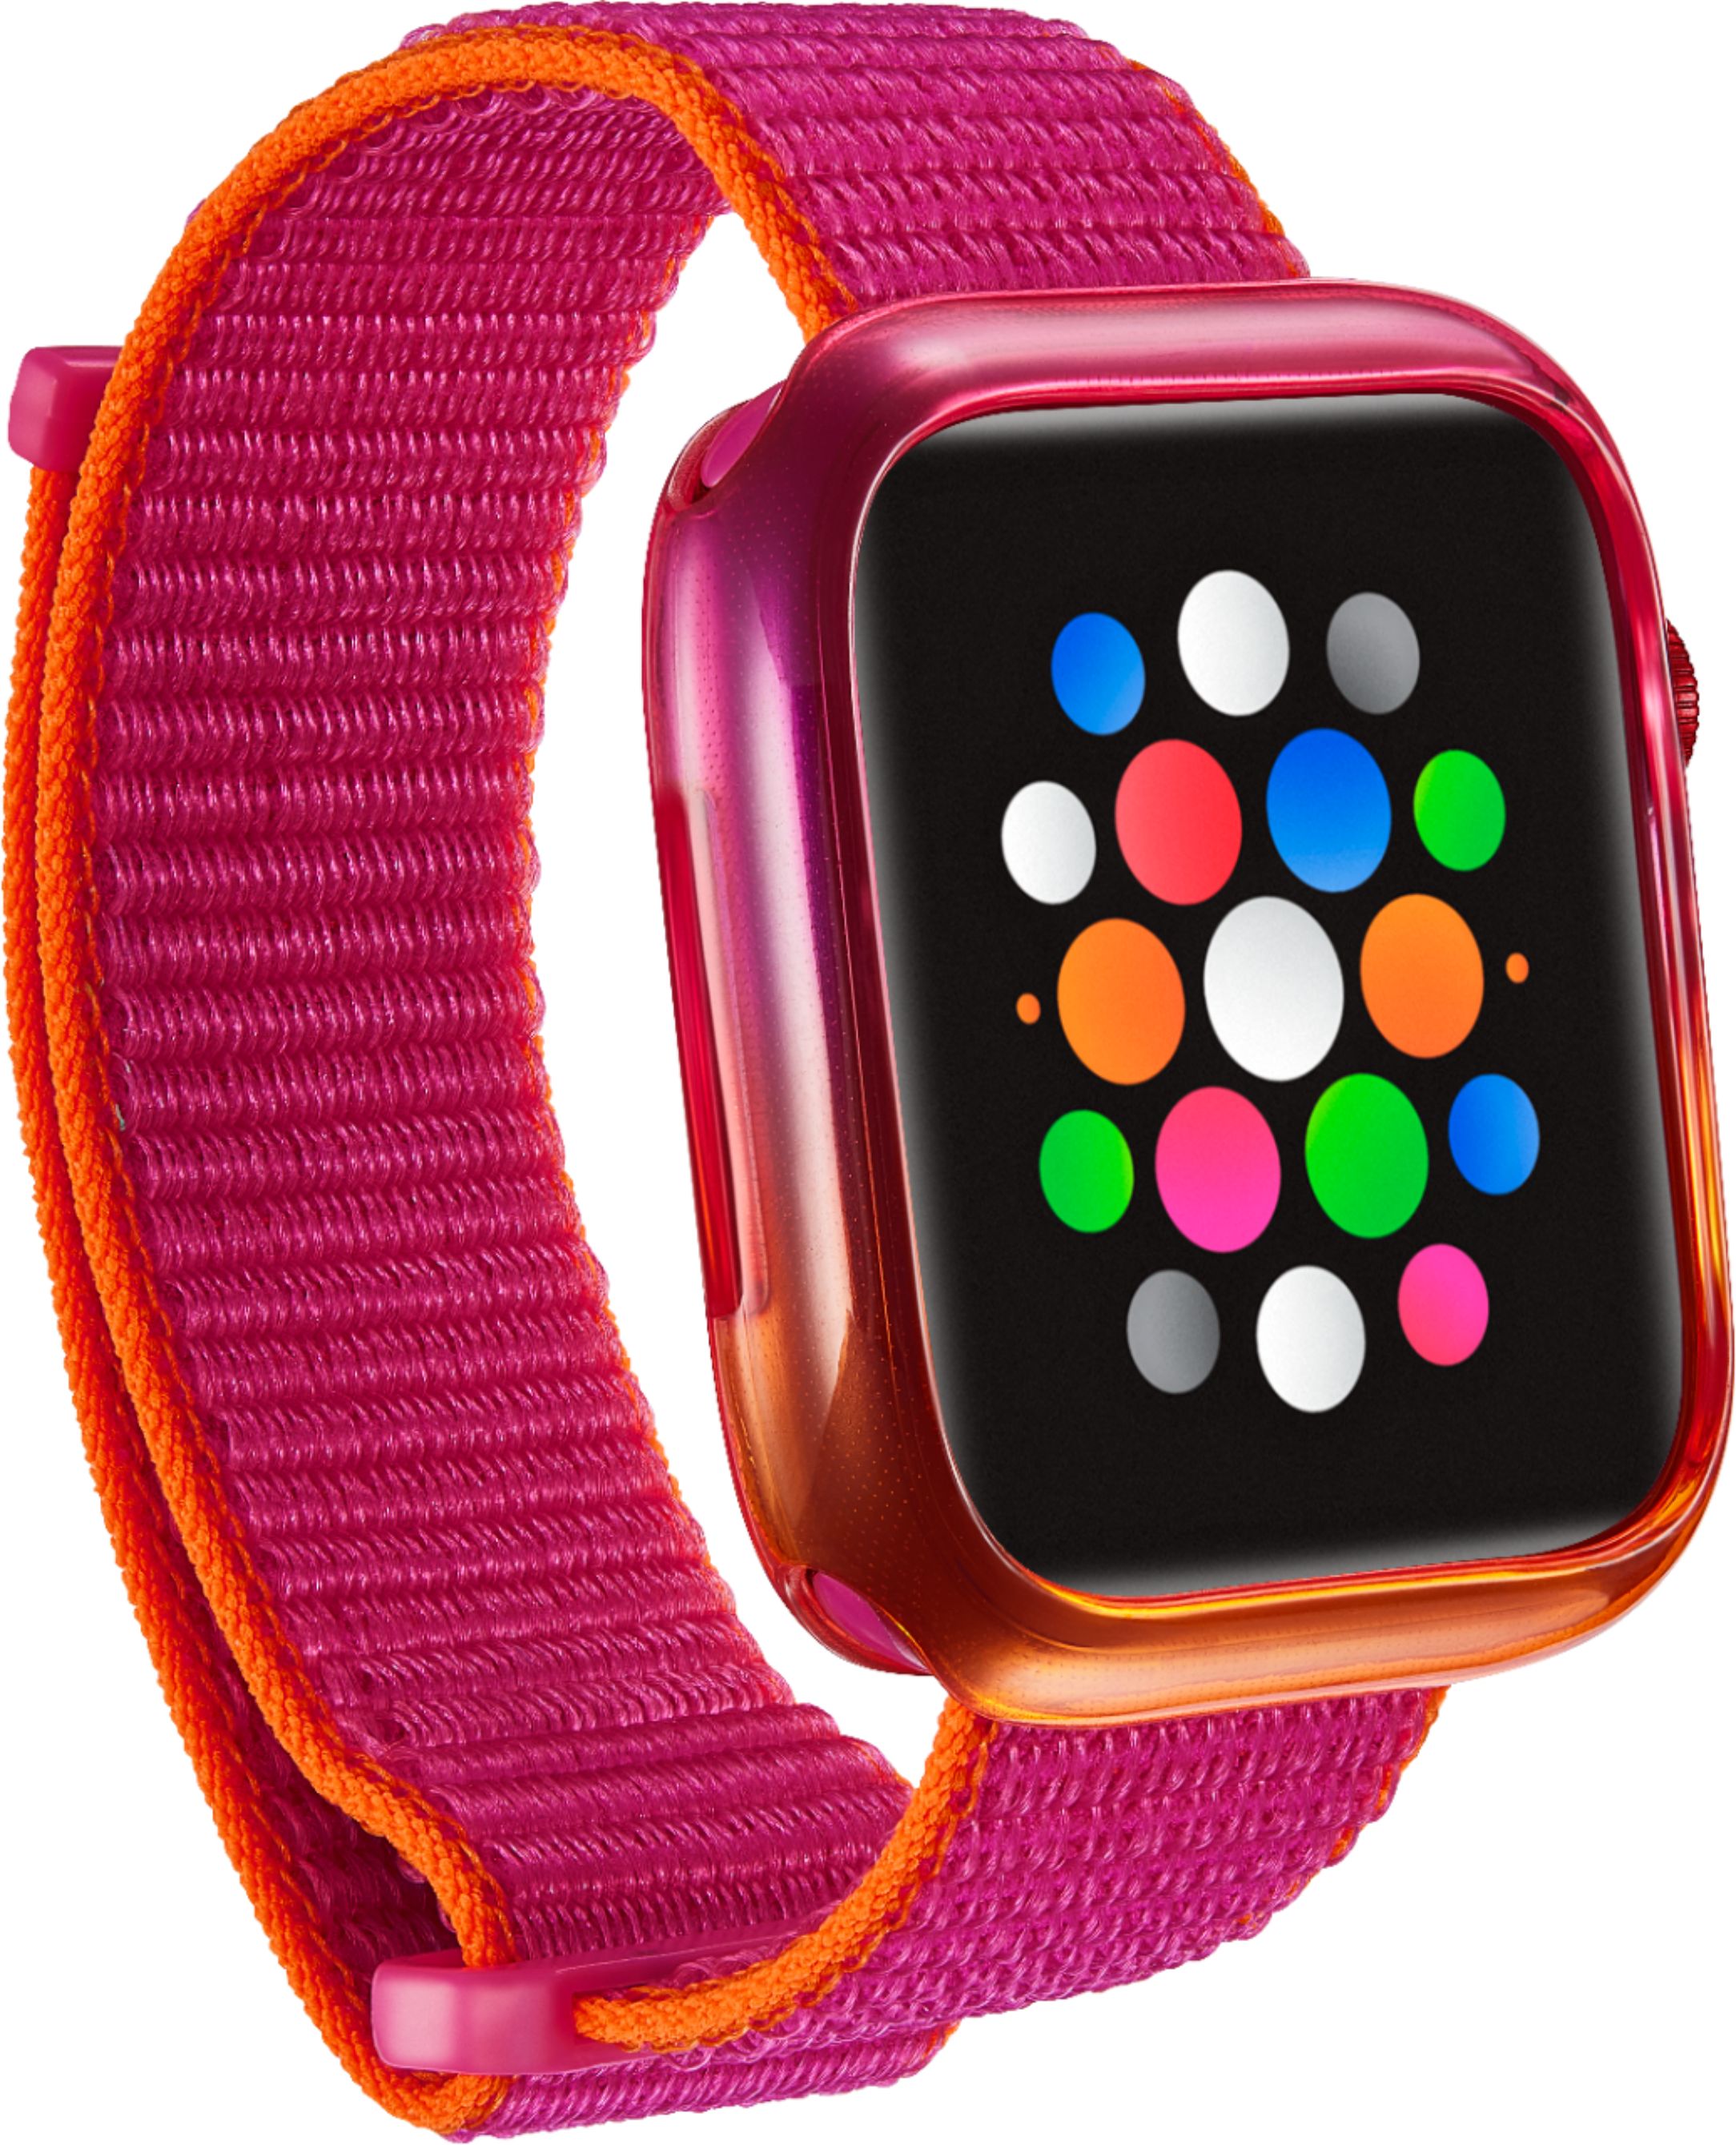 Angle View: Modal™ - Nylon Watch Band and Bumper Case for Apple Watch 42mm and 44mm - Pink